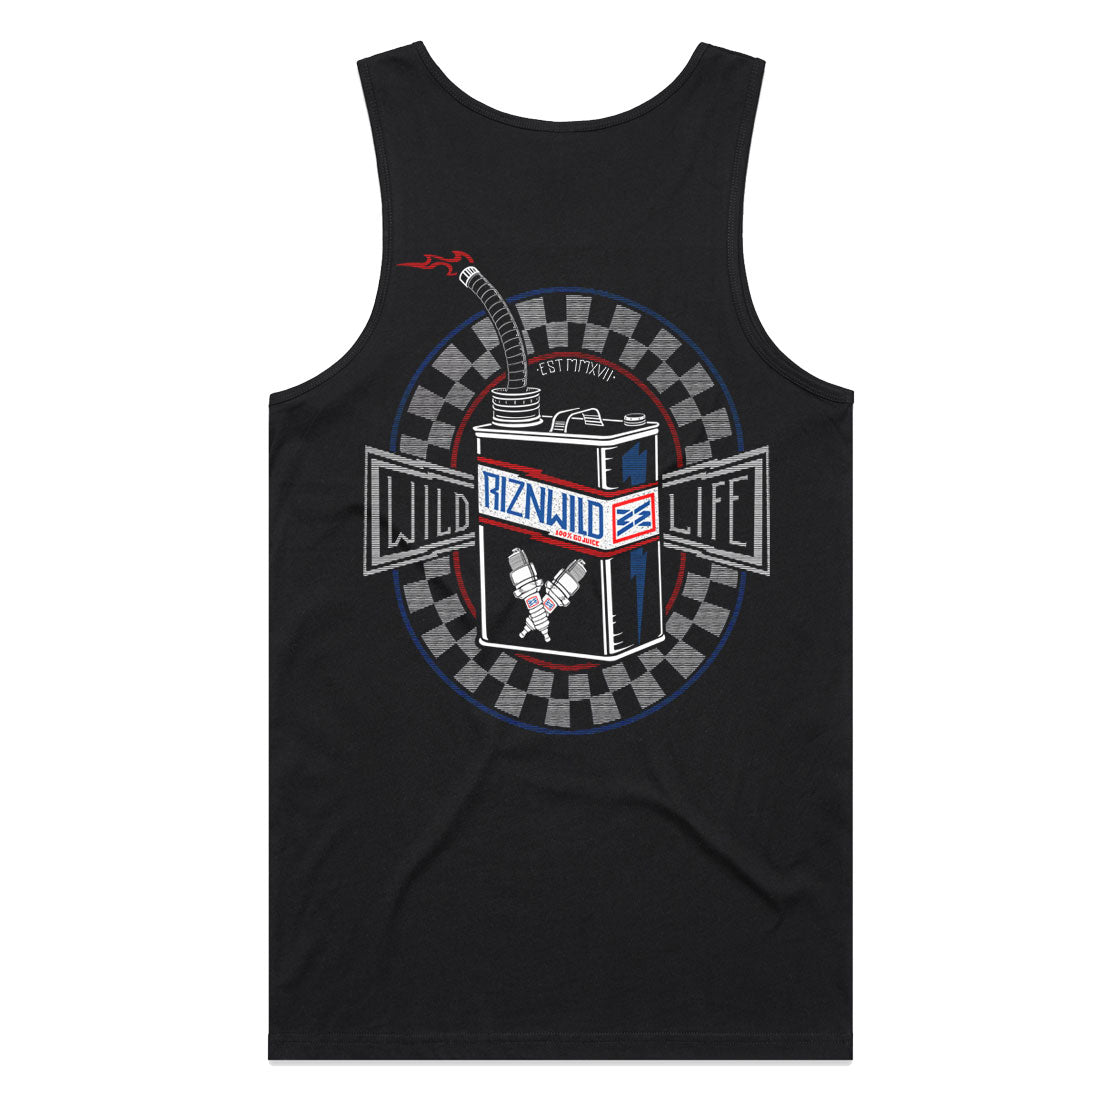 RIZNWILD men's black tank vintage gas can red, white and blue